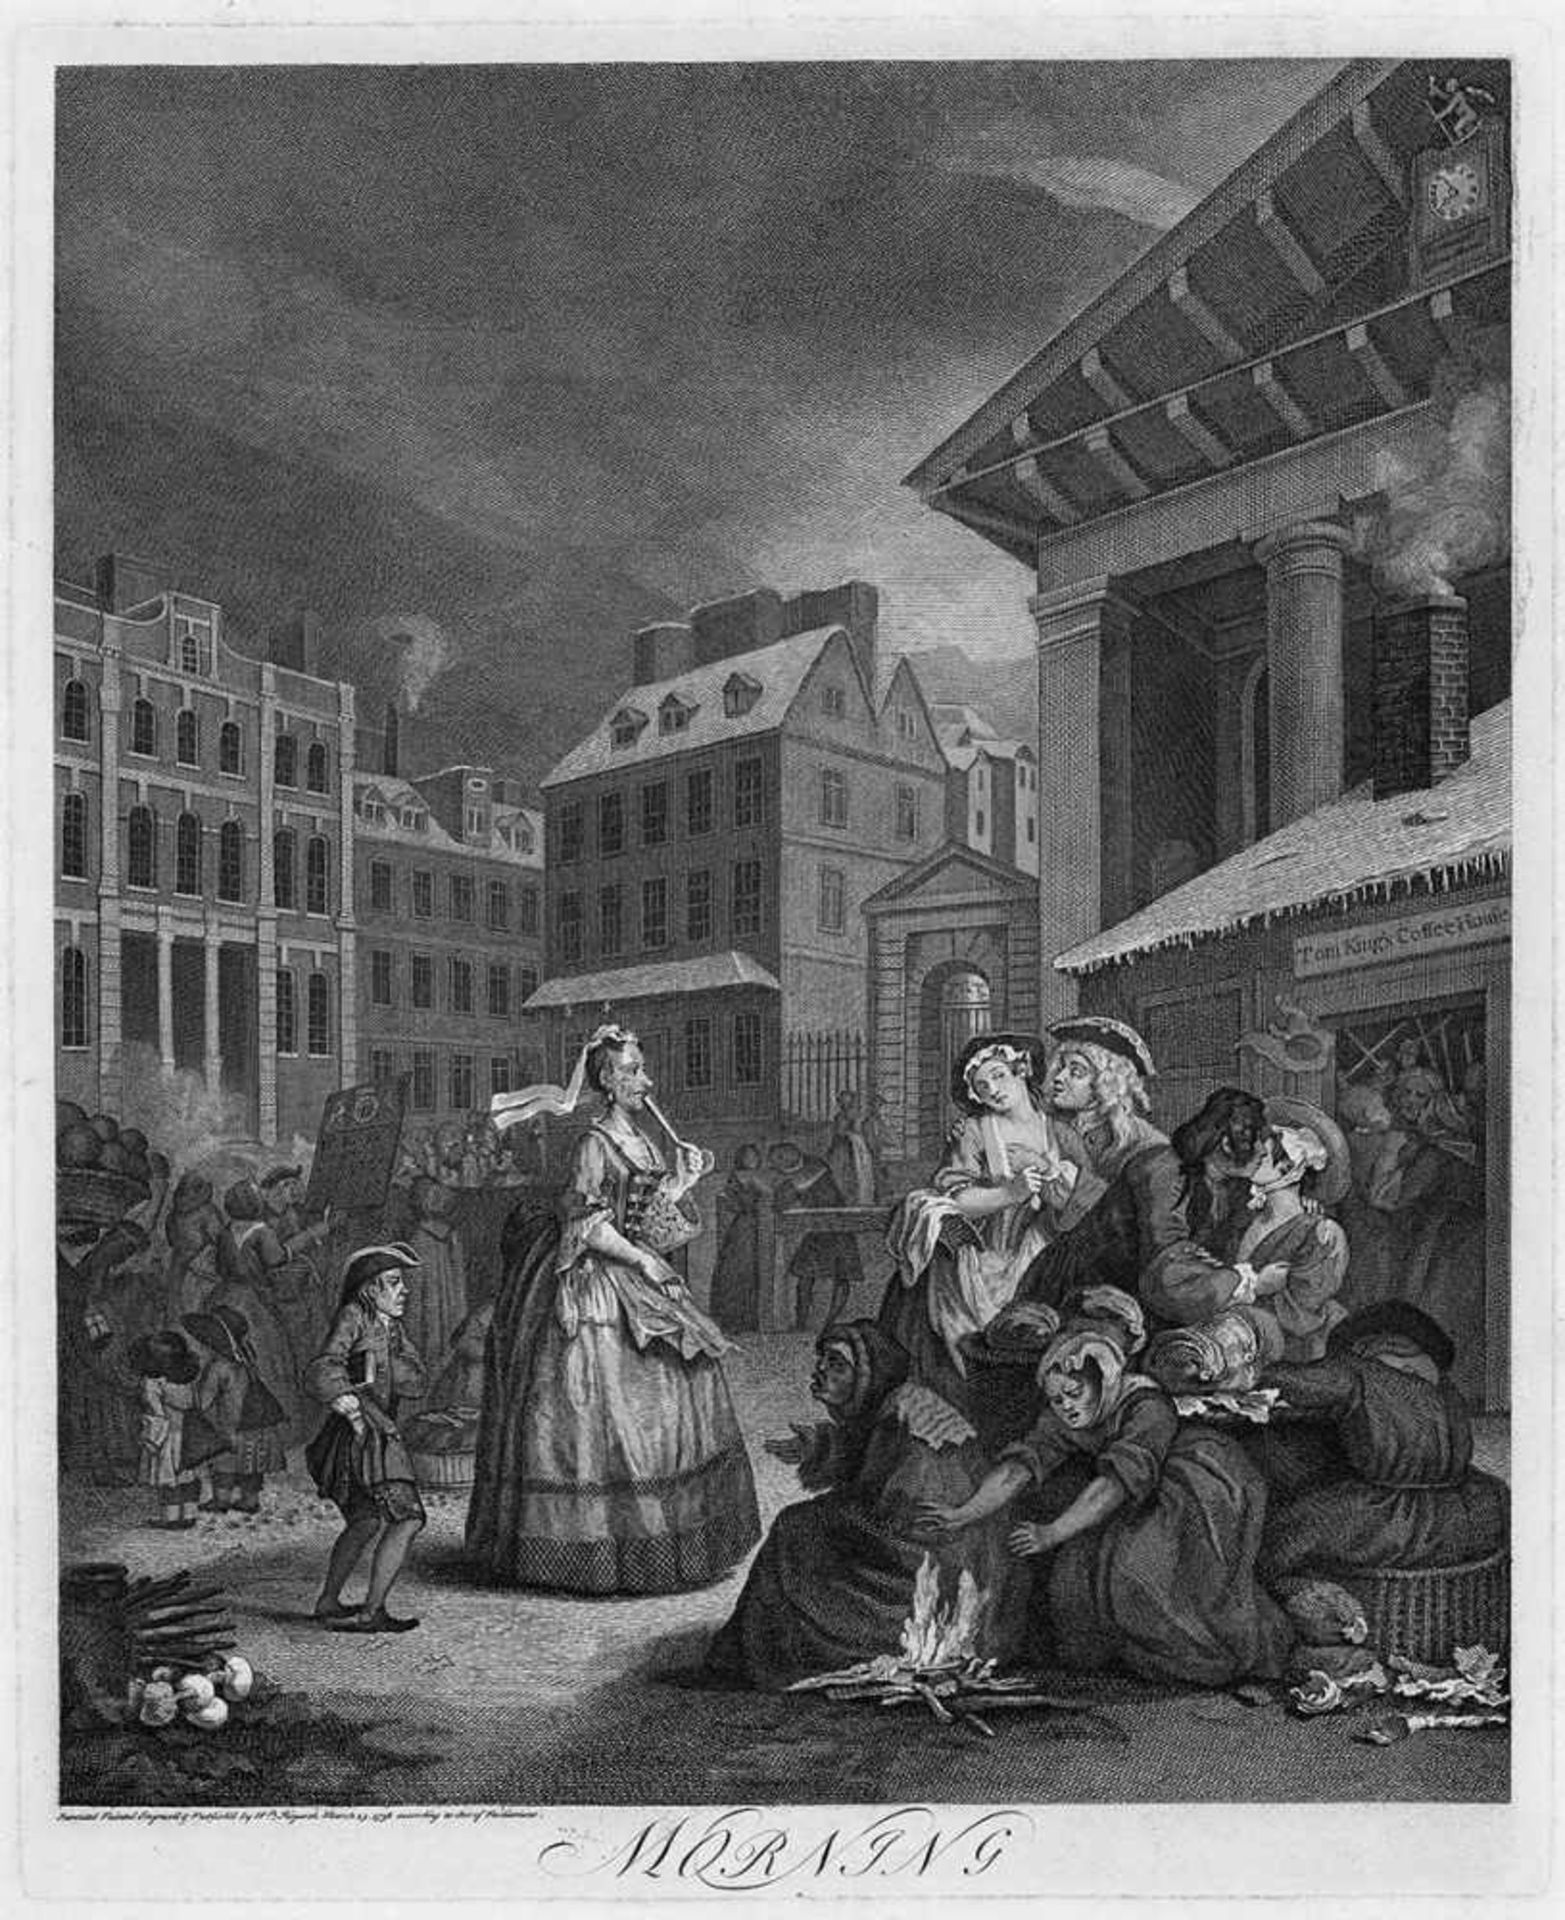 Hogarth, William: The Four Times of the DayThe Four Times of the Day: Morning, Noon, Evening, Night.